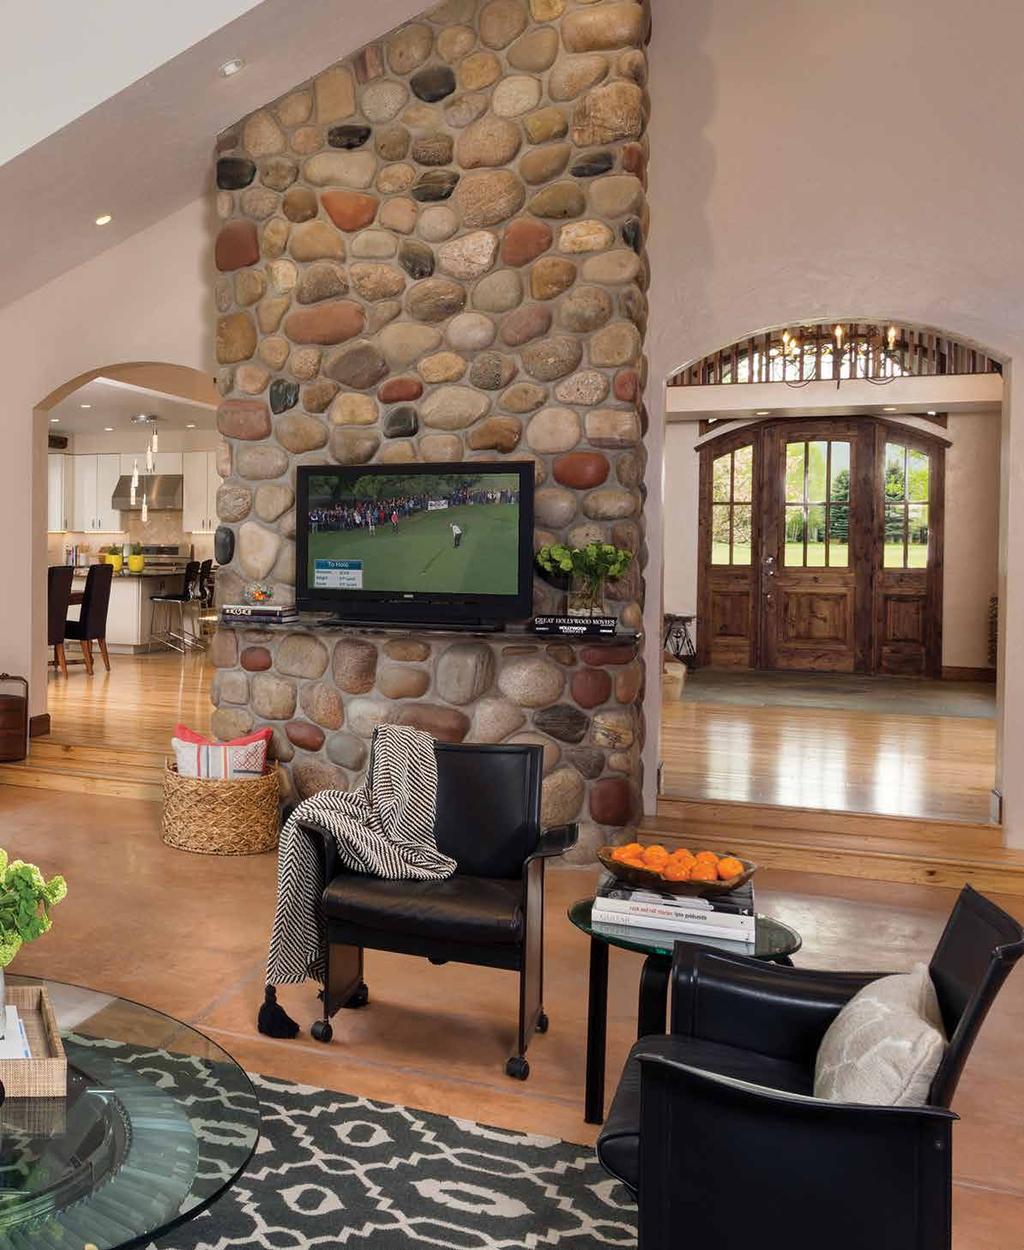 The home enjoys an open floorplan with the living room